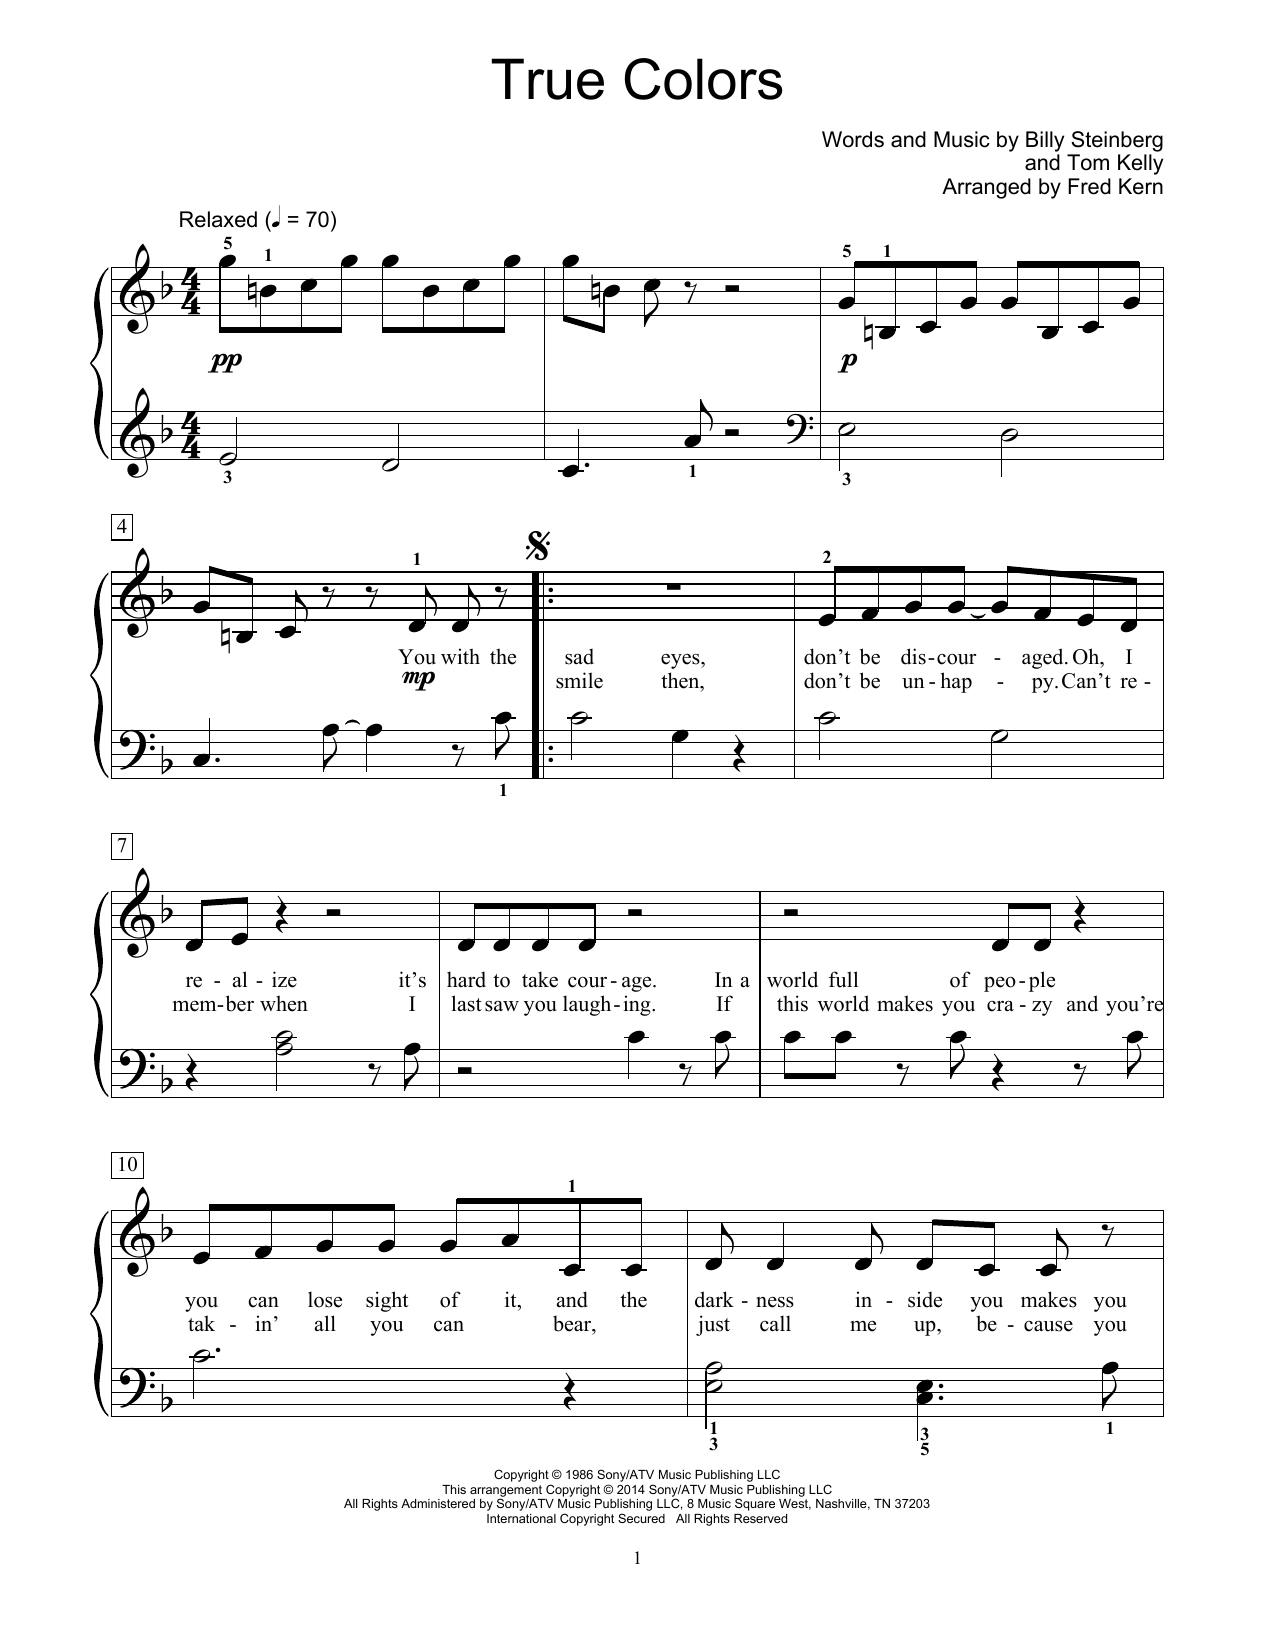 Fred Kern True Colors sheet music notes and chords. Download Printable PDF.